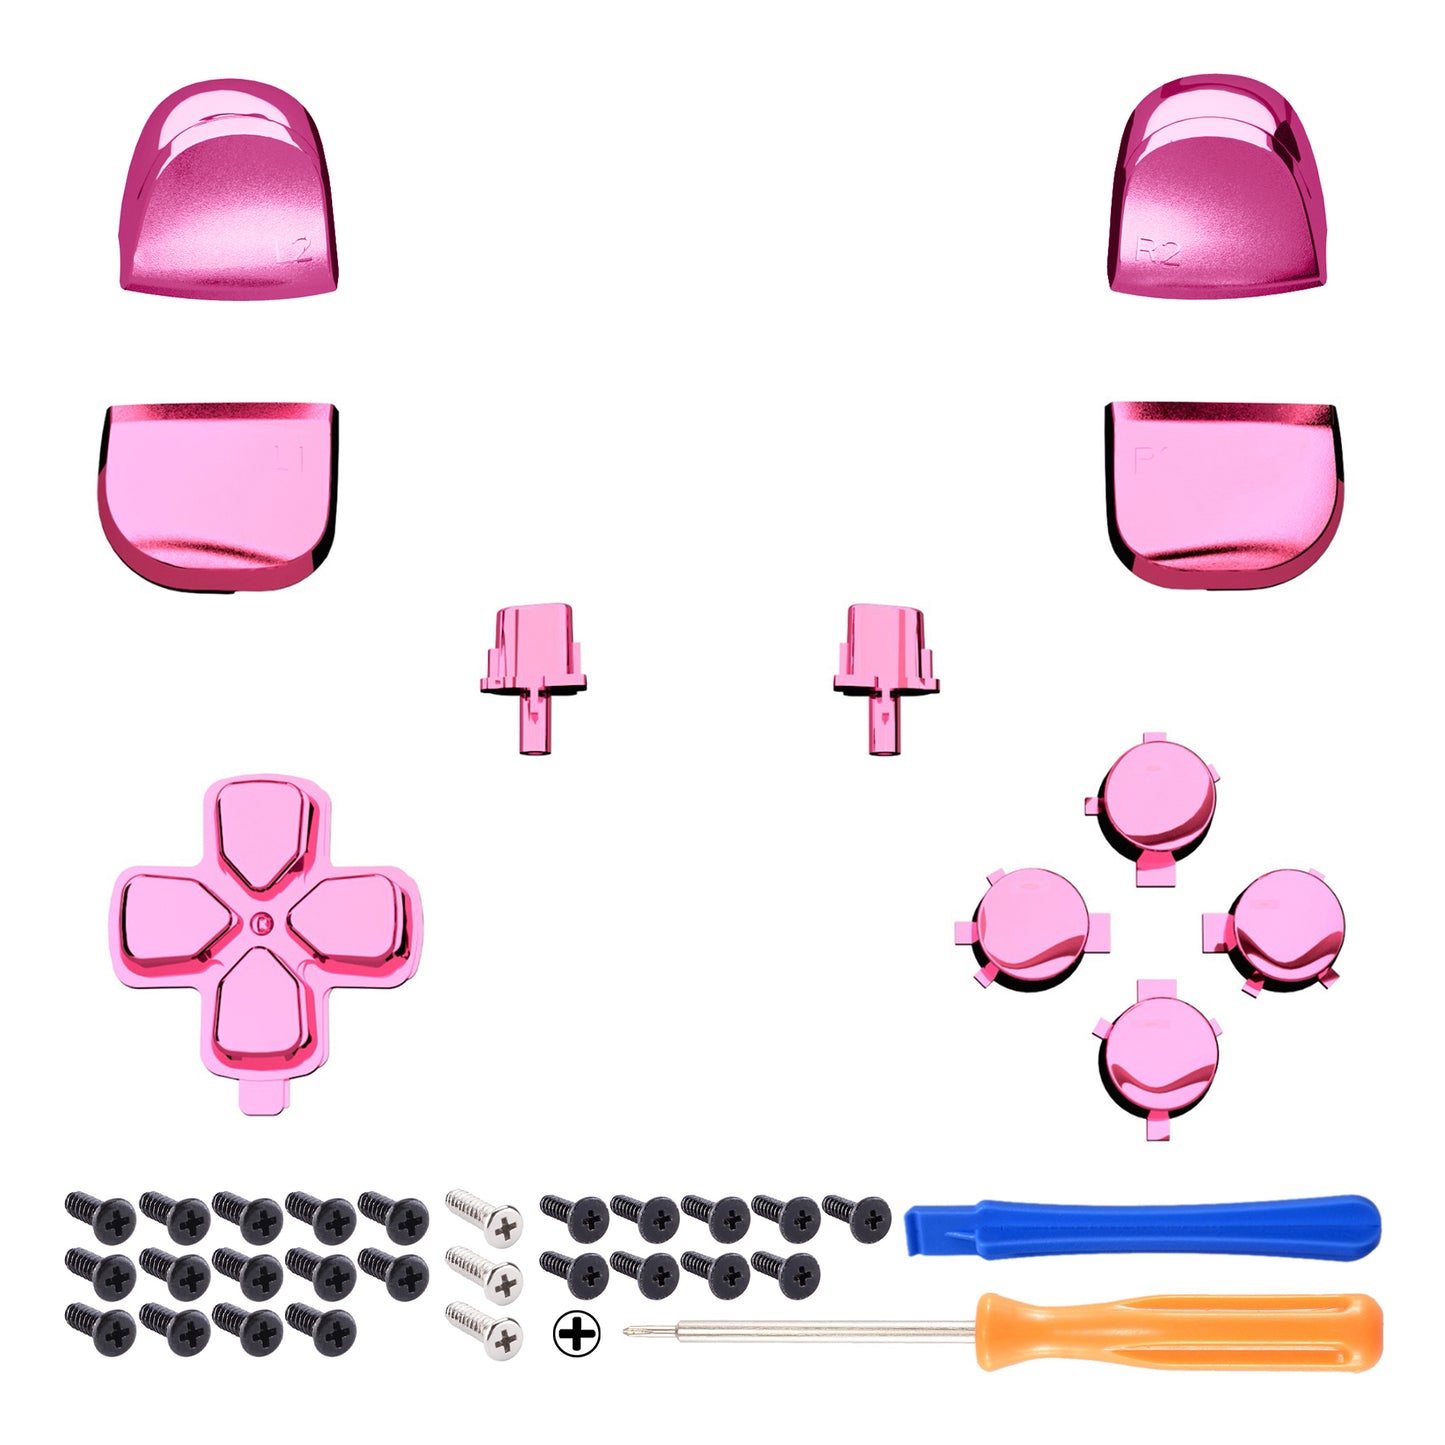 eXtremeRate Retail Replacement D-pad R1 L1 R2 L2 Triggers Share Options Face Buttons, Chrome Pink Full Set Buttons Compatible With ps5 Controller BDM-010 & BDM-020 - JPF2007G2